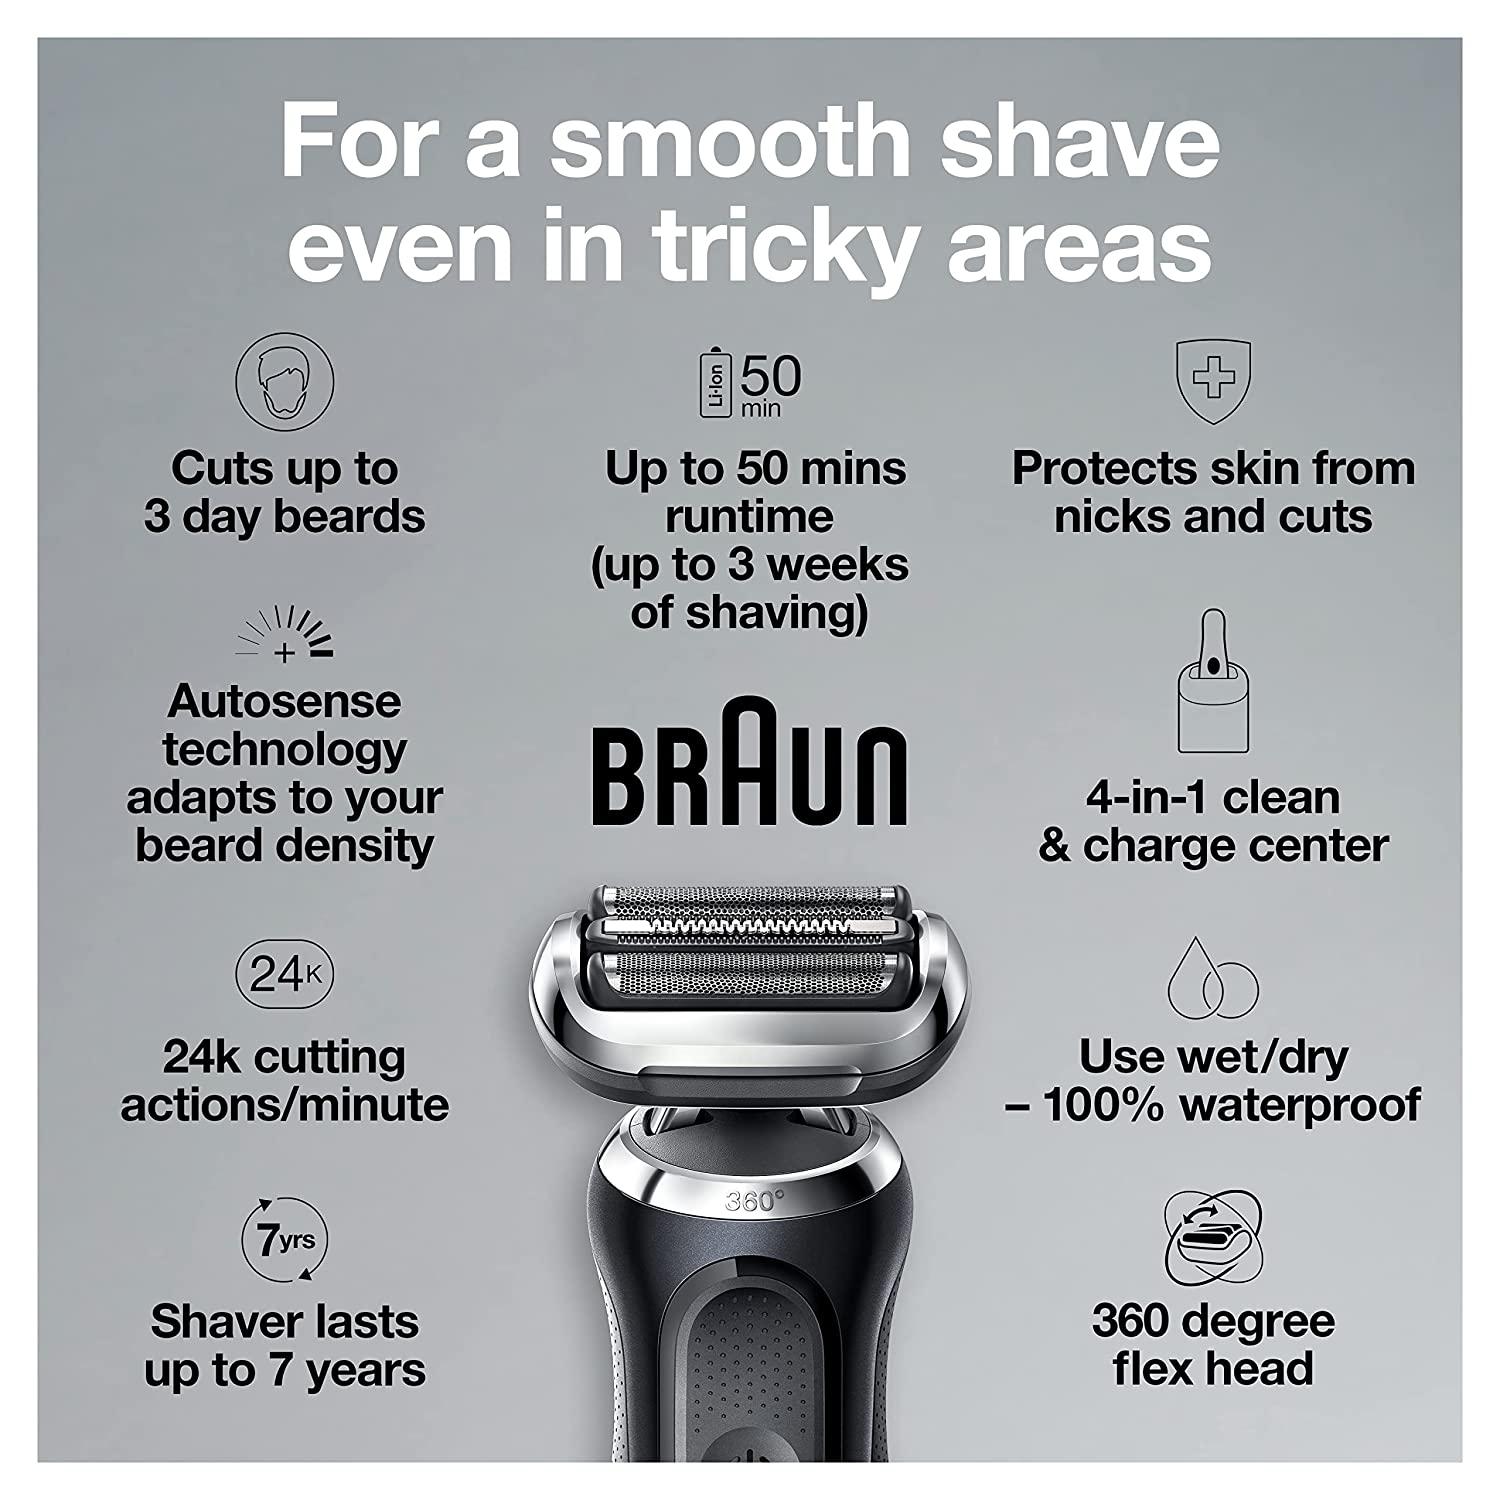 Braun Series 7 7085cc Flex Rechargeable Wet & Dry Men's Electric Shaver  With Clean & Charge Station, Stubble & Beard Trimmer